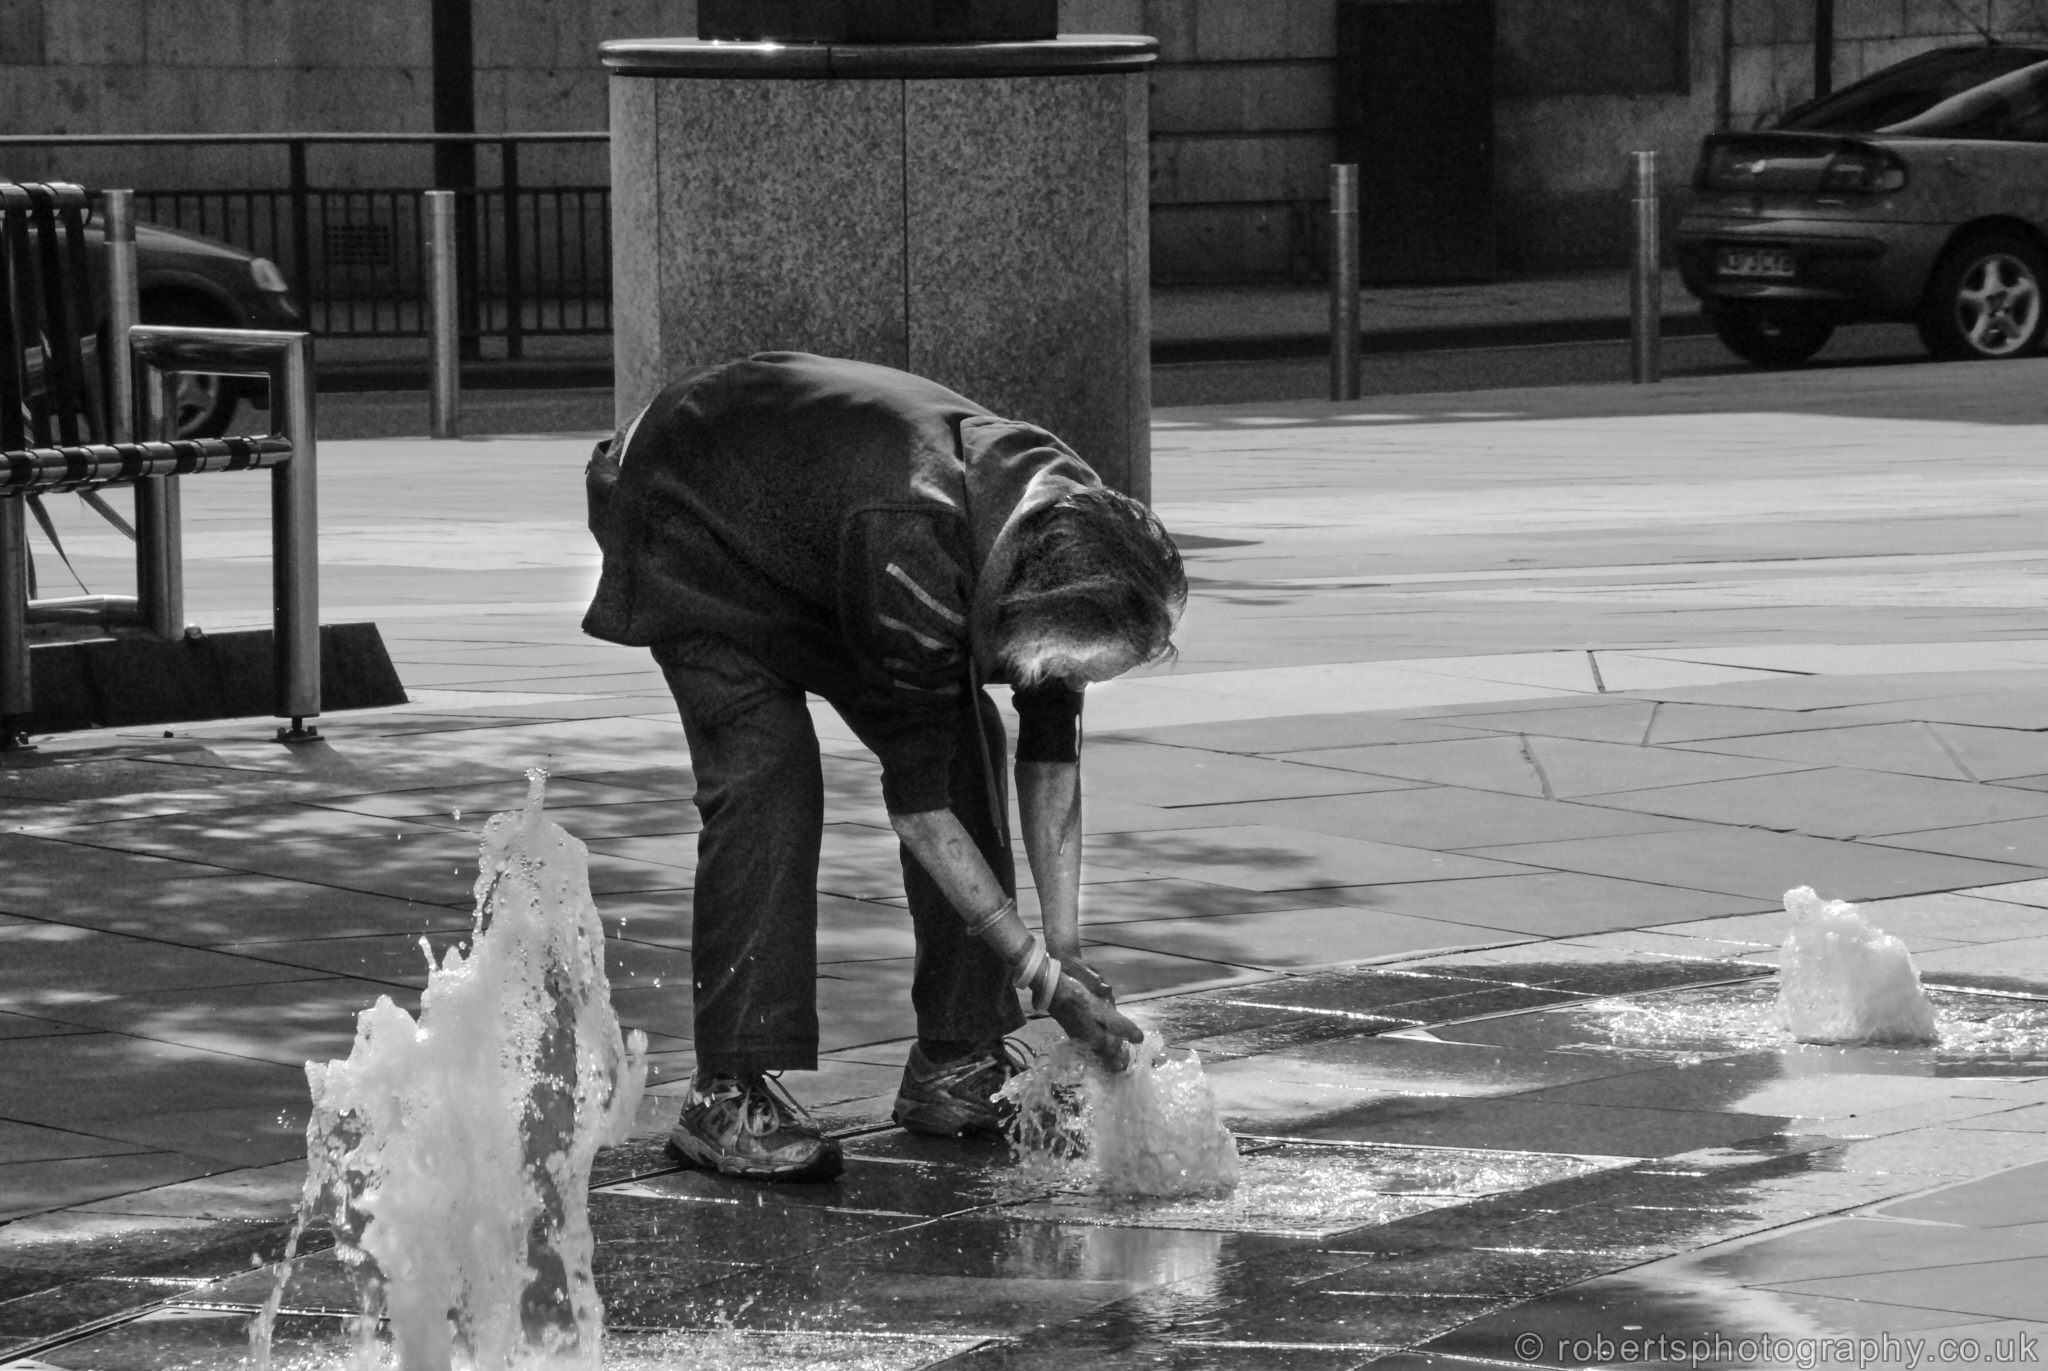 Homeless man is pictured taking a wash in a fountain, City Square, Leeds, West Yorkshire